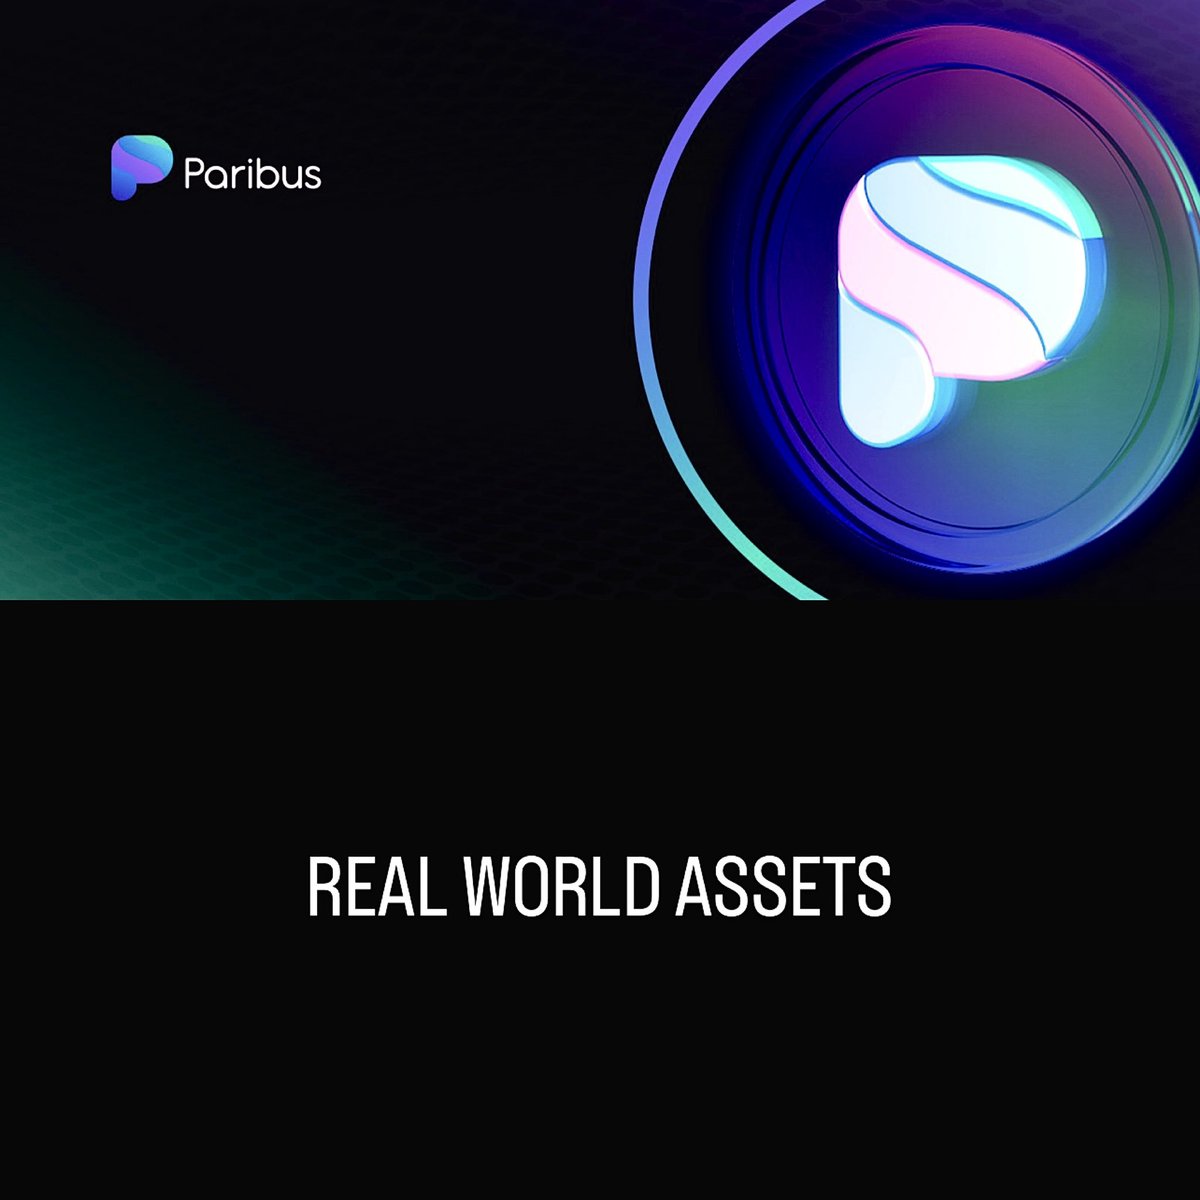 My last post on Real World Assets & tokenization had me thinking, what else can tokenization bring to the smaller investor? The truth is tokenization opens up a window Of opportunity never been had before by the smaller investor. Imaging being able to own fractions of massive…